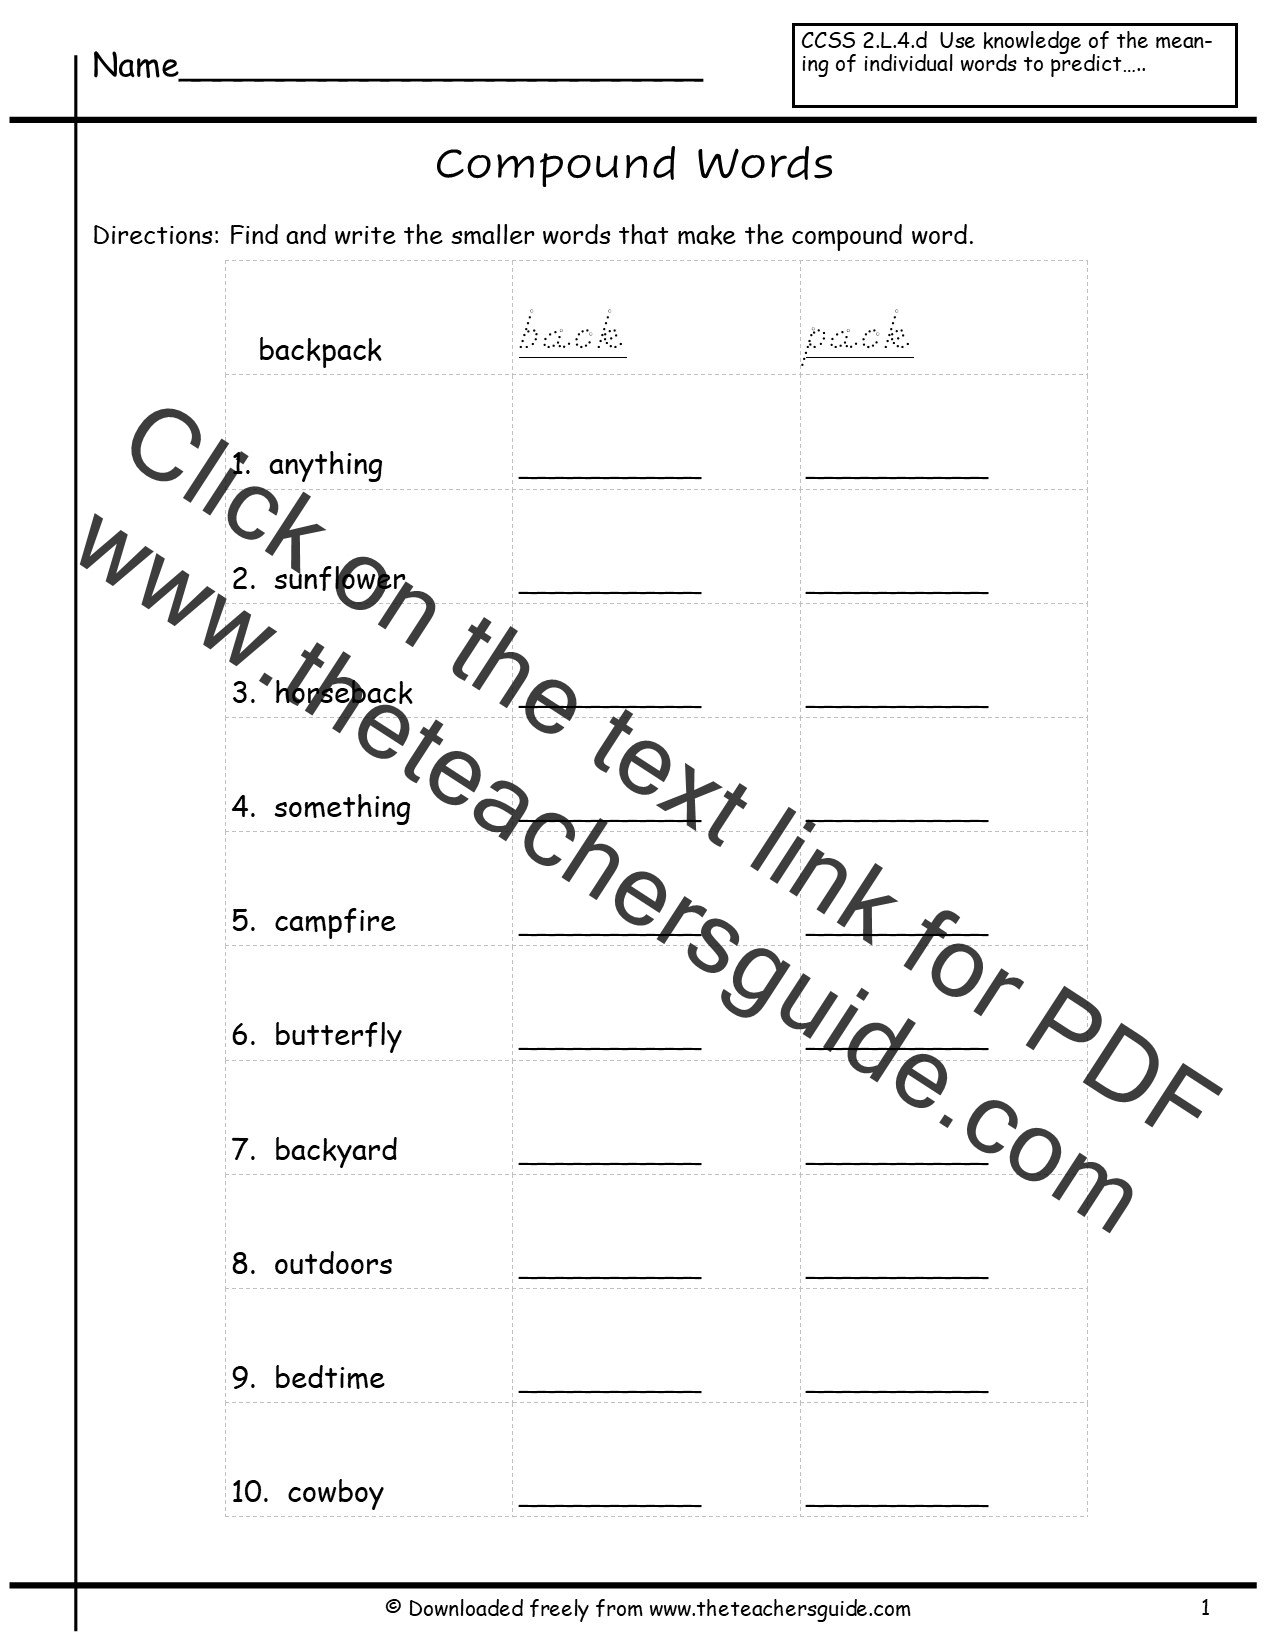 compound-word-worksheets-from-the-teacher-s-guide